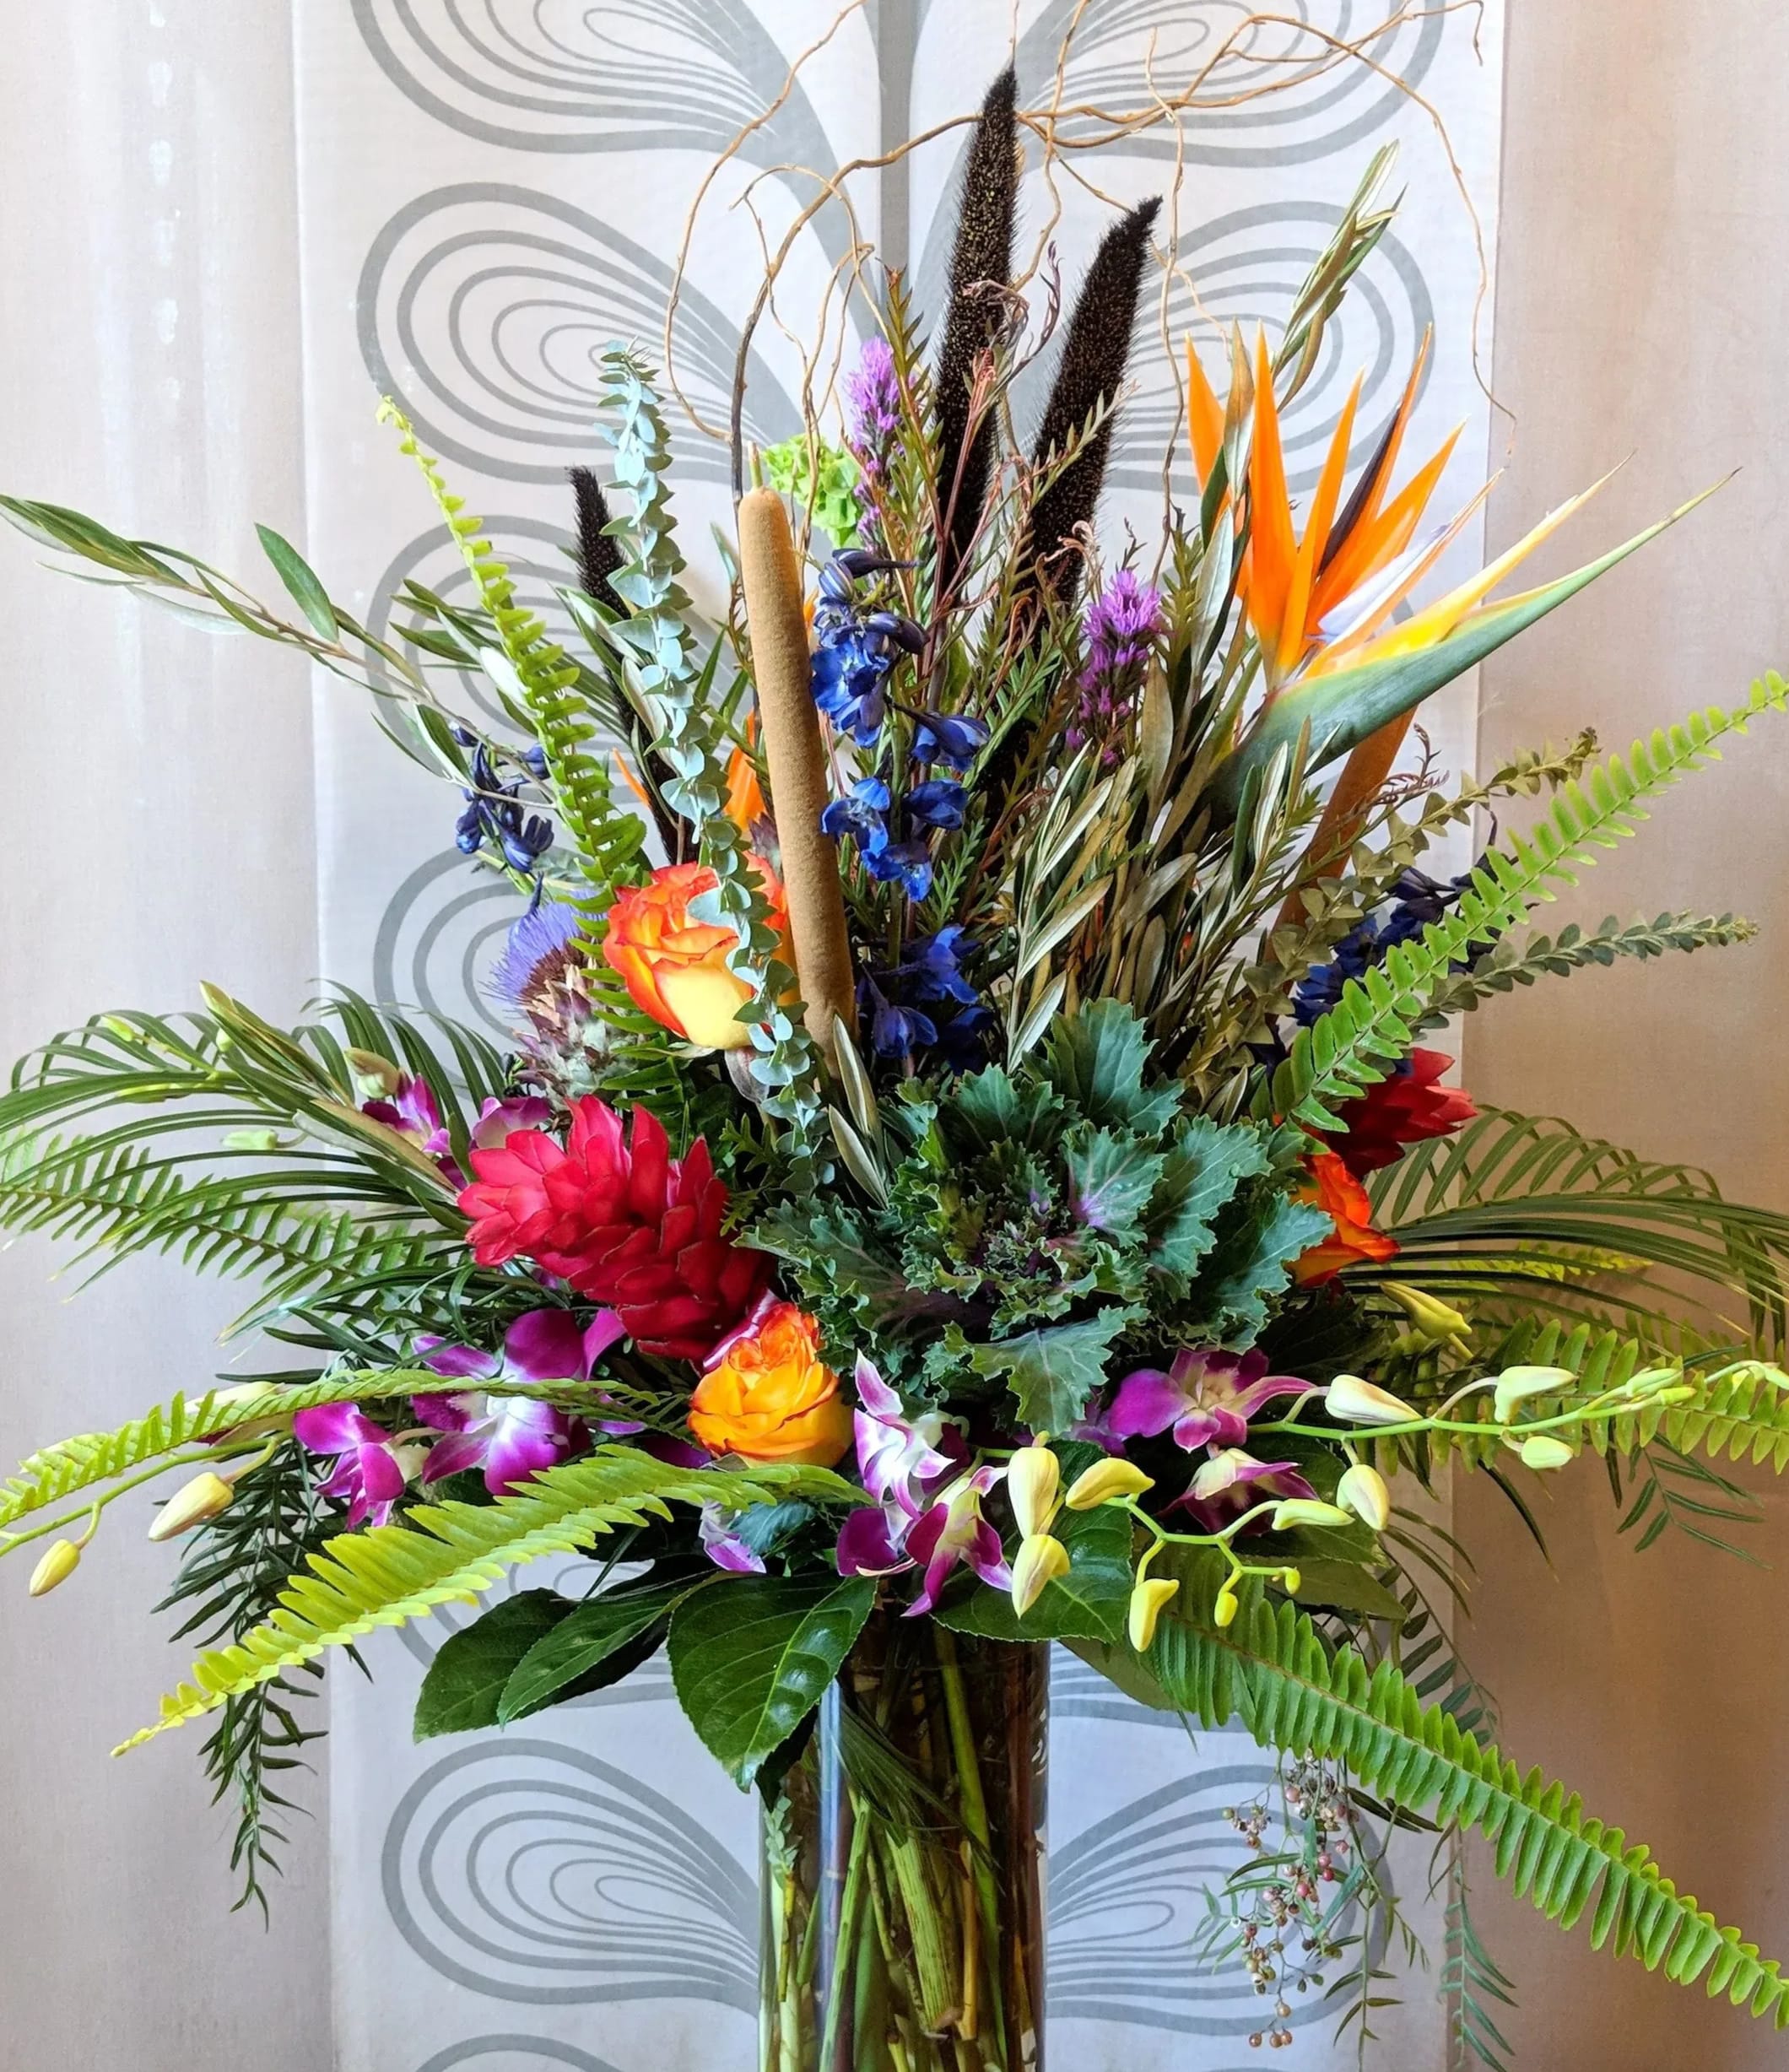 Luscious  - Introducing a tall, modern, and show-stopping tropical vase arrangement that will transport you to a vibrant and exotic paradise. This arrangement features a stunning combination of birds of paradise, purple dendrobium orchids, blue delphinium, red ginger, yellow roses, kale, bells of Ireland, and is accented with tropical foliage and curly willow.  The stars of this arrangement are the magnificent birds of paradise. With their striking orange and blue petals resembling a tropical bird, these blooms are the epitome of exotic beauty. Their bold presence adds drama and flair to the overall composition.  The purple dendrobium orchids bring a touch of elegance and allure to the arrangement. These delicate and cascading blooms symbolize beauty and love. Their purple hue adds depth and richness to the composition, creating a sense of luxury.  Adding a touch of tranquility and serenity are the blue delphinium flowers. With their tall and graceful spikes of vibrant blue petals, these blooms evoke a sense of calmness and peace. Their striking color adds a contrasting element to the arrangement, making them a focal point of visual interest.  The red ginger flowers introduce a burst of vibrant red to the composition. These exotic blooms symbolize strength and passion. Their unique shape and dramatic color create a bold statement and capture attention.  Adding a touch of warmth and romance are the yellow roses. These timeless and classic blooms symbolize friendship and joy. Their bright yellow color brings a sense of happiness and positivity to the arrangement, creating a feeling of cheerfulness.  To add texture and interest, kale is incorporated into the arrangement. This unique and leafy green adds a fresh and organic feel. Its rich green color and intricate shape add depth and dimension to the overall design.  The bells of Ireland contribute an element of whimsy and charm. With their tall, spiky stems adorned with green bell-shaped blooms, these flowers symbolize good luck and prosperity. Their vibrant green color adds a pop of freshness and invigorates the arrangement.  The tropical foliage and curly willow serve as accents, adding a finishing touch to the overall look. The lush green leaves and dynamic shapes of the foliage create a tropical ambiance, while the curly willow adds a touch of artistic flair and movement.  This tall and show-stopping tropical vase arrangement is perfect for making a bold statement and bringing a sense of exotic beauty to any space. Whether displayed in a modern home or as a centerpiece for a tropical-themed event or celebration, this arrangement is sure to captivate and inspire.  Experience the allure and beauty of this exquisite tropical vase arrangement today and let its combination of birds of paradise, purple dendrobium orchids, blue delphinium, red ginger, yellow roses, kale, bells of Ireland, tropical foliage, and curly willow transport you to a tropical paradise like no other. 